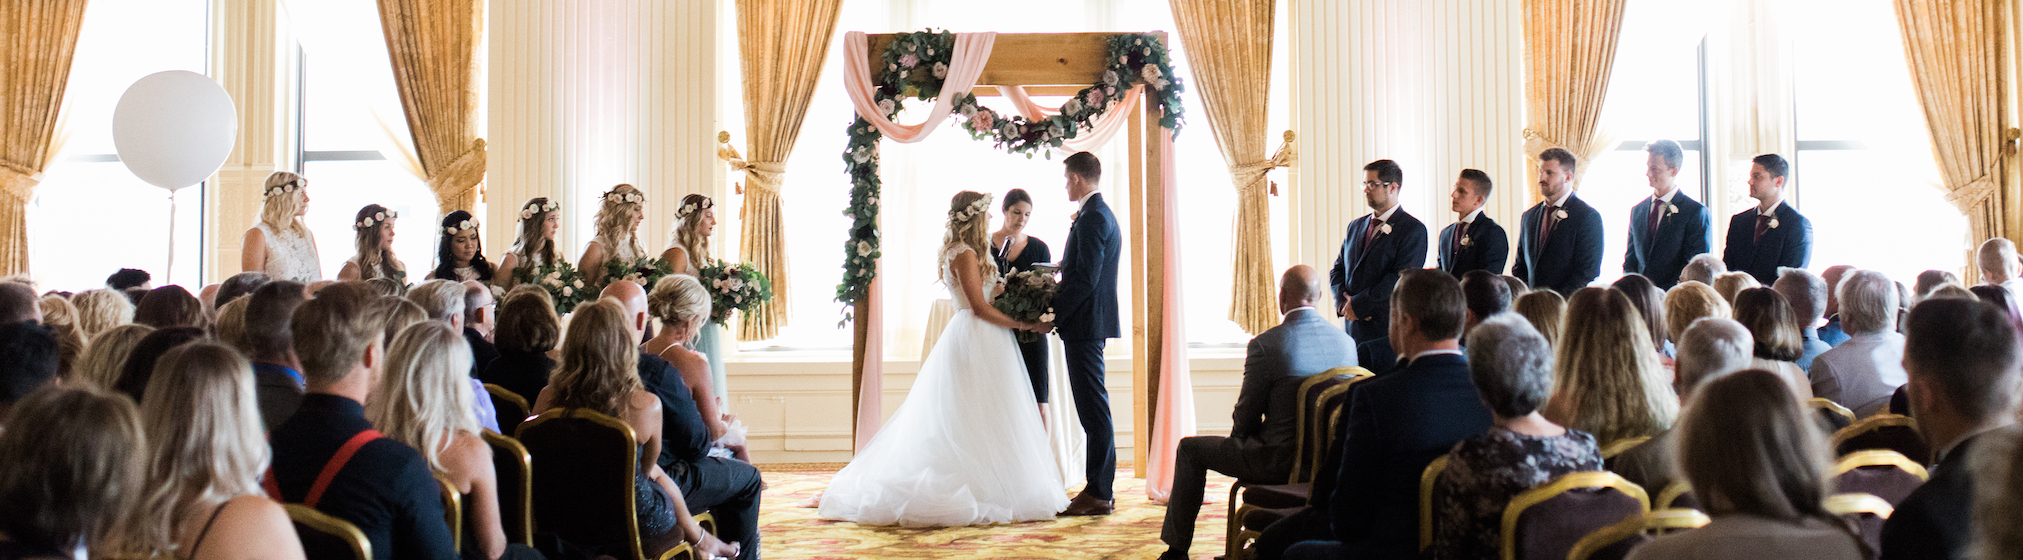 Weddings at the Pfister Hotel